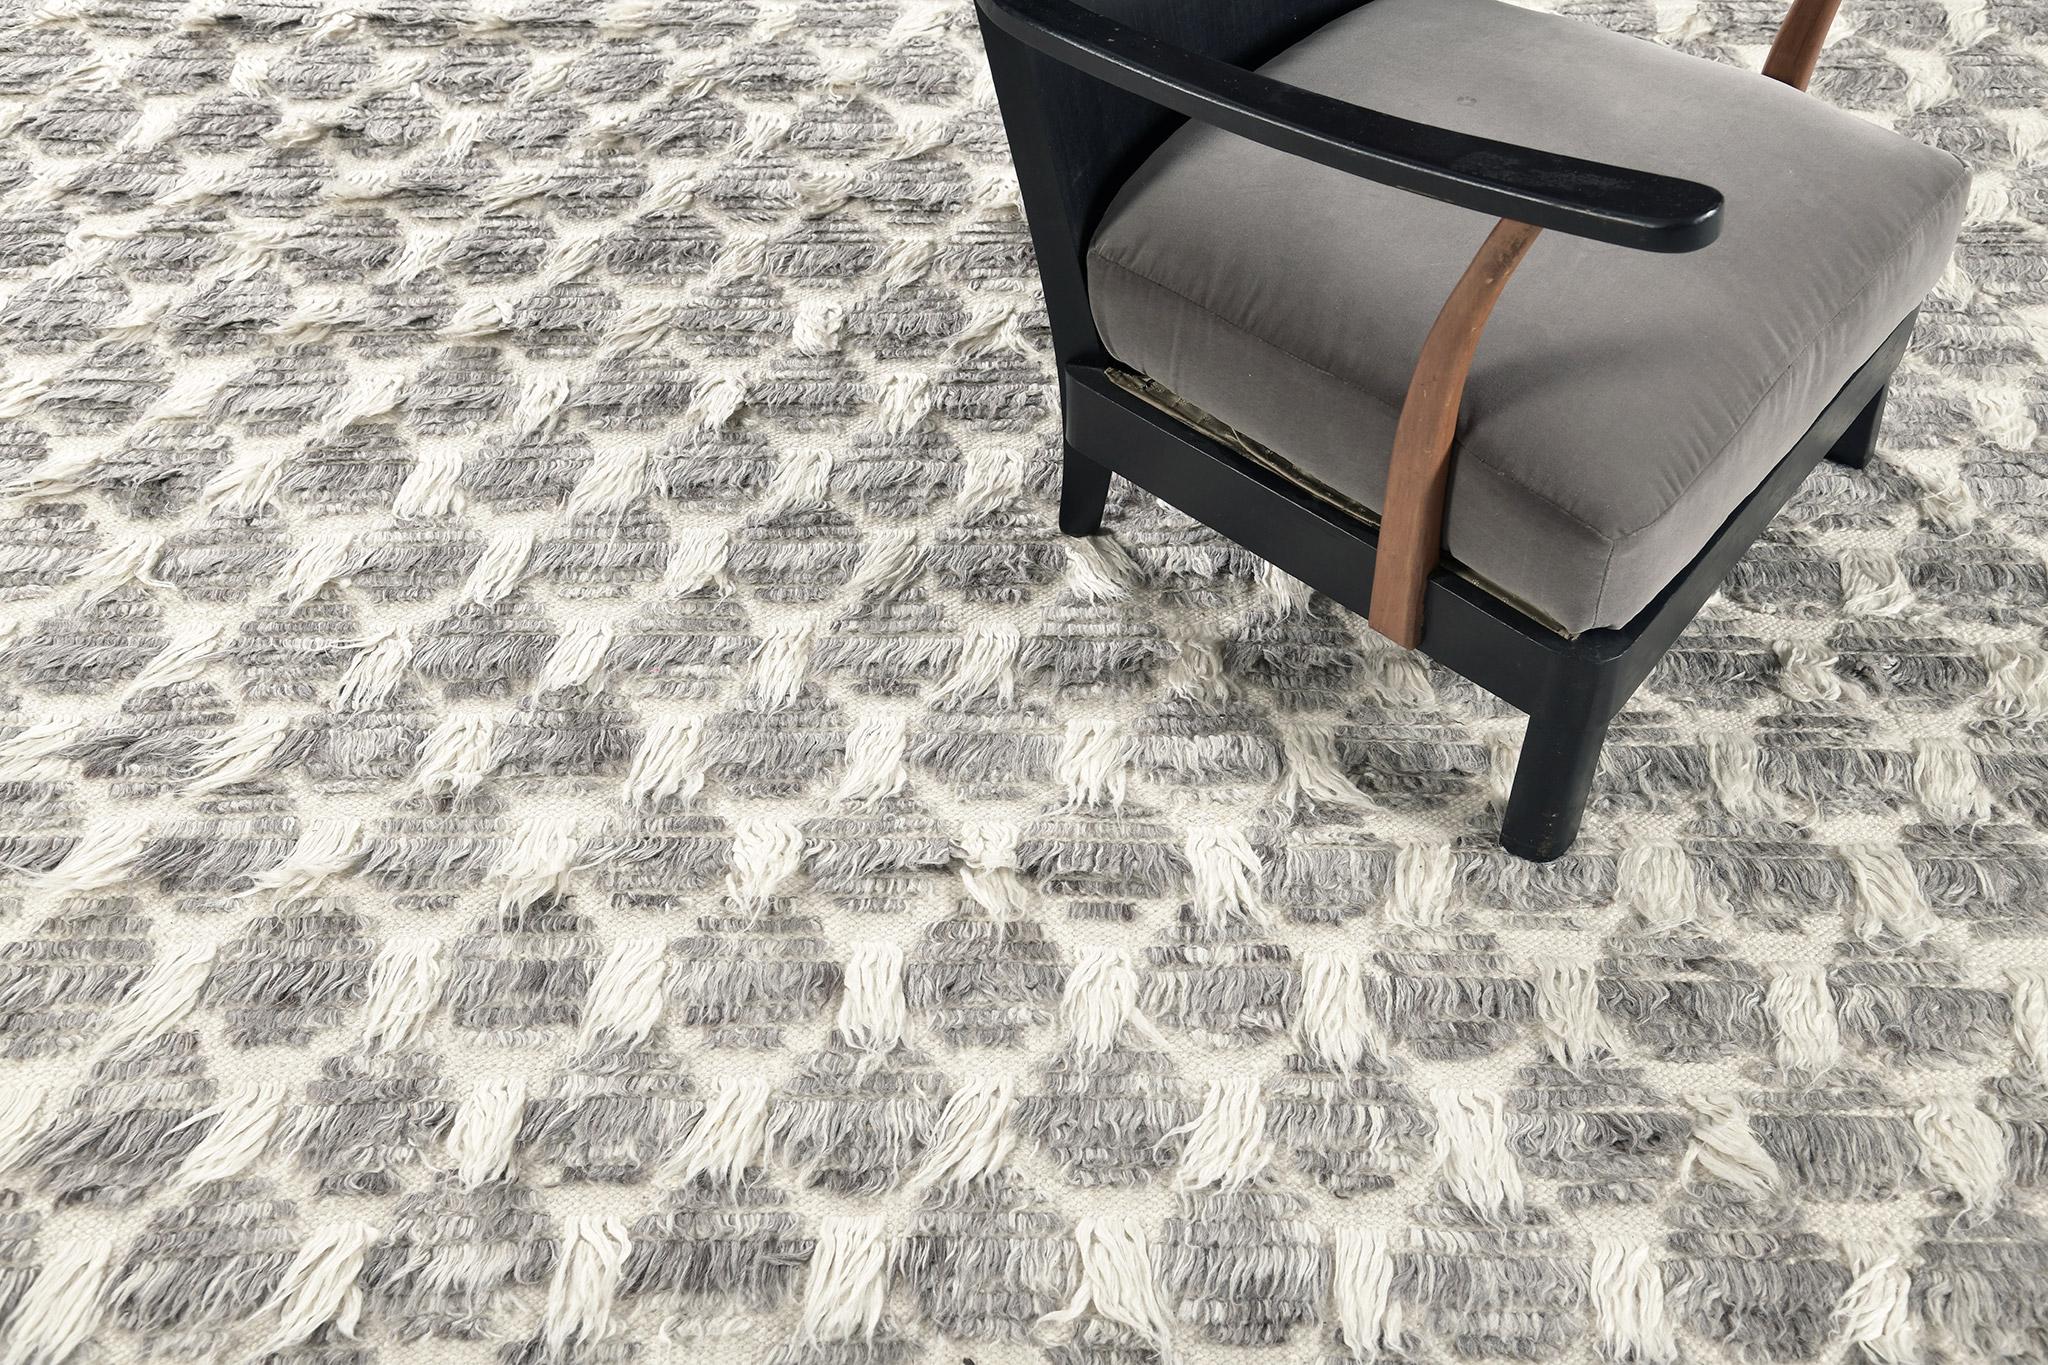 In the Nami rug, varied pile heights and flatweave design elements are configured in a petal lattice motif of dappled gray with ivory lineation.

An extension of Mehraban’s popular Amihan design, the Sahara Collection delves further with grid-riffs